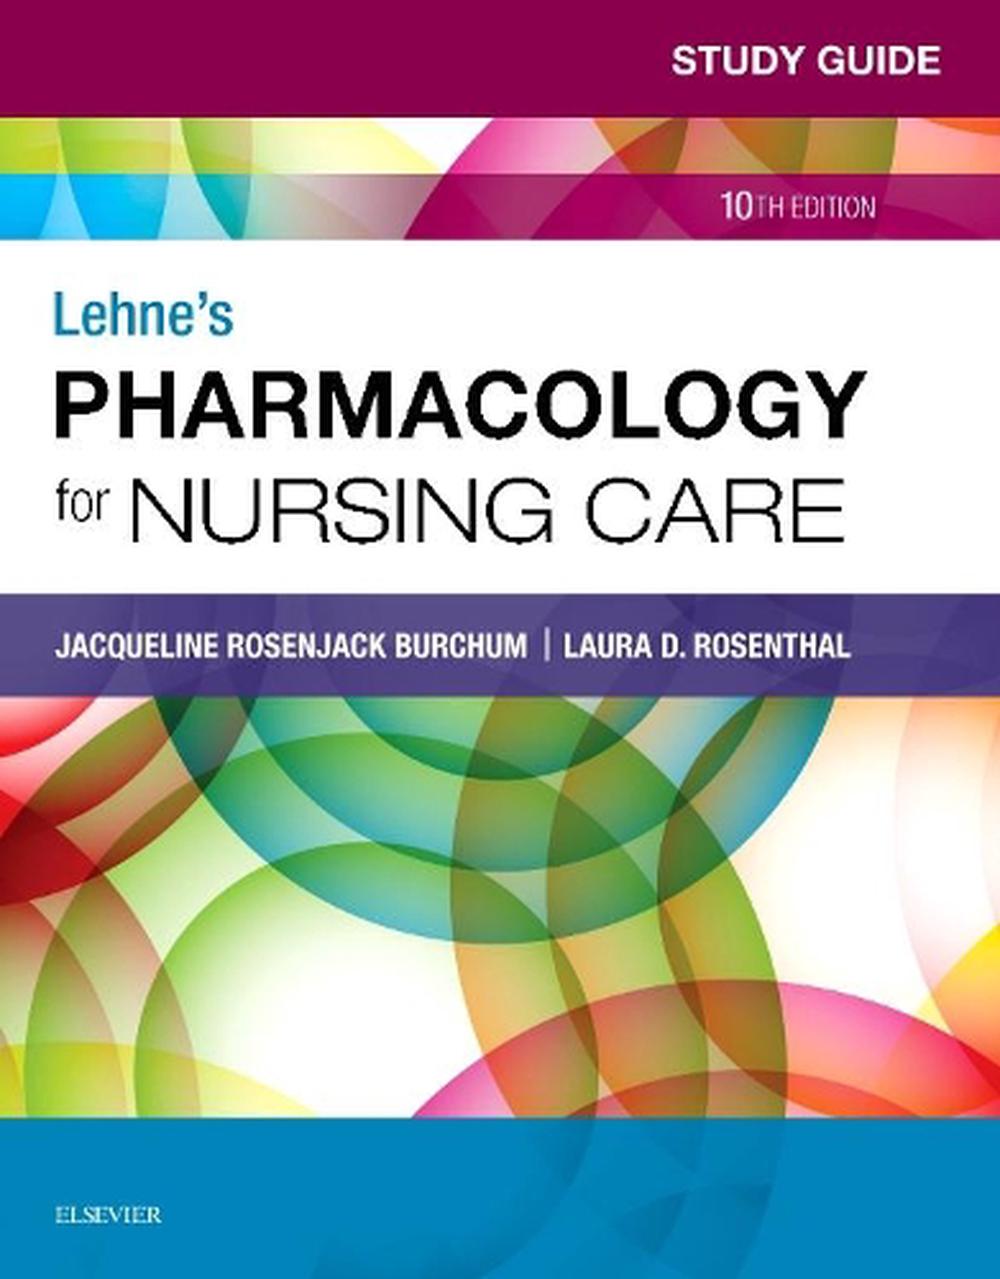 Study Guide for Lehne's Pharmacology for Nursing Care by Jacqueline